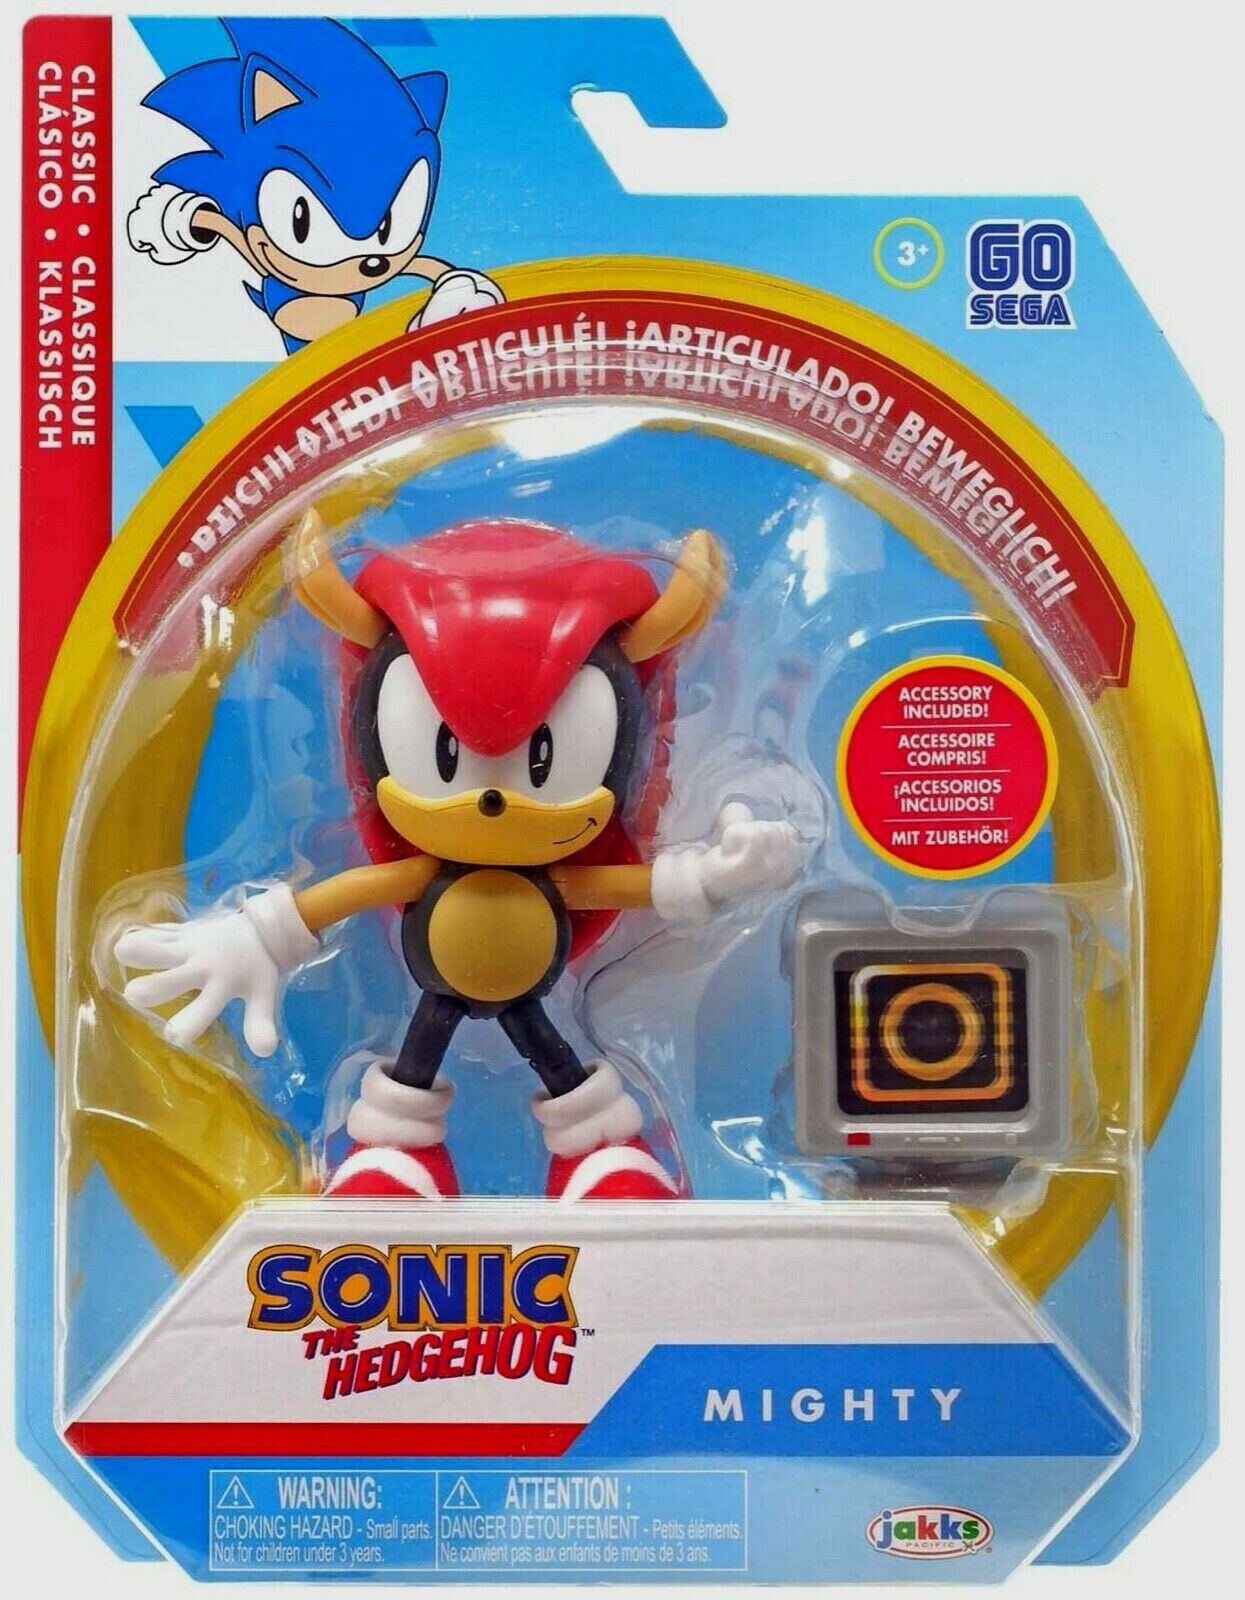 Jakks Sonic 4" Inch Articulated Sonic Figure With Accessory Wave 3 Mighty